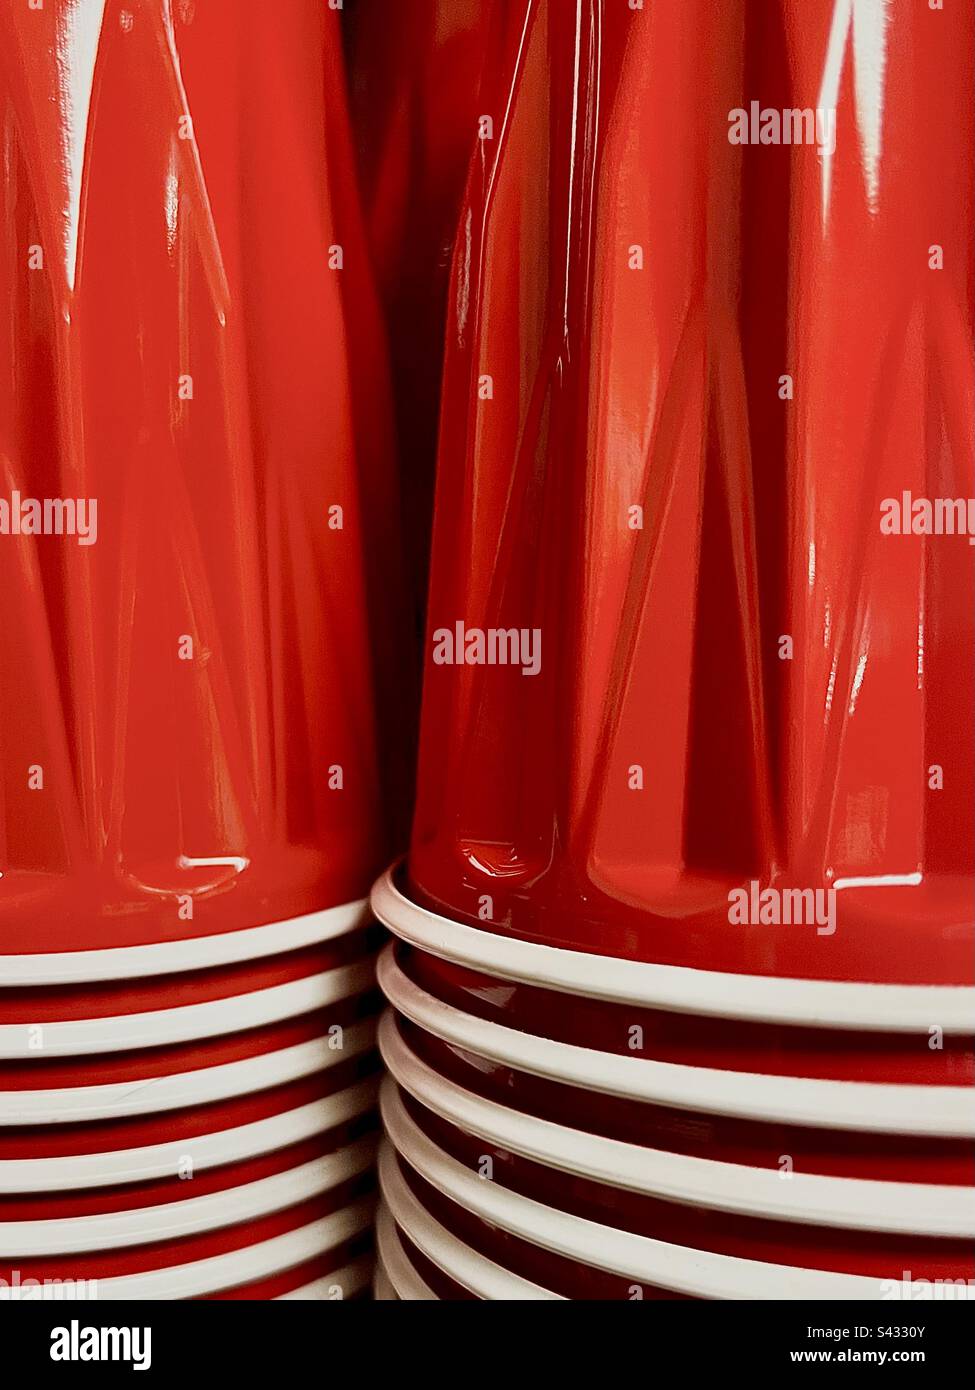 https://c8.alamy.com/comp/S4330Y/two-glossy-stacks-of-red-solo-brand-plastic-drinking-cups-fill-entire-frame-S4330Y.jpg